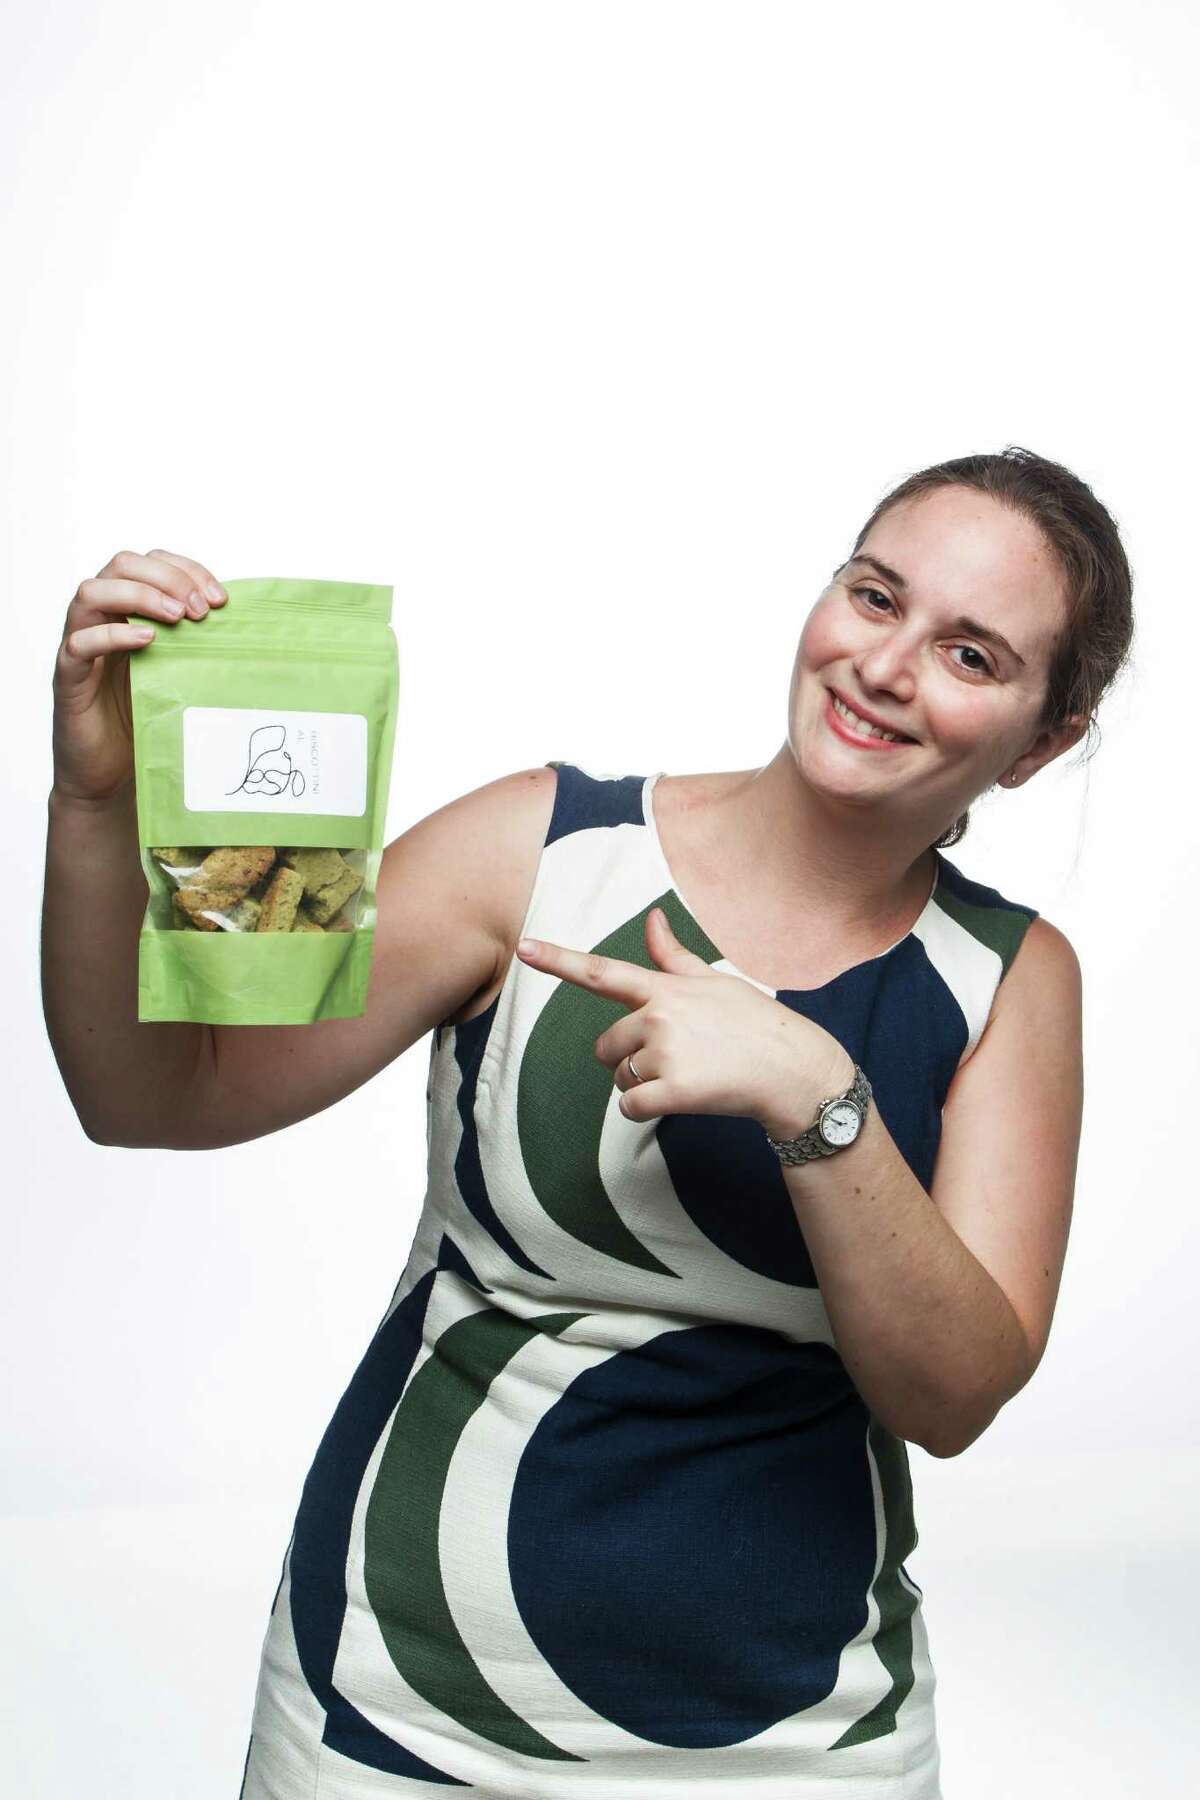 Robyn Schwartz, owner of Fianco a Fianco, a local biscotti maker, poses for a portrait in the Houston Chronicle Photo Studio, Tuesday, Aug. 28, 2012, in Houston. ( Michael Paulsen / Houston Chronicle )